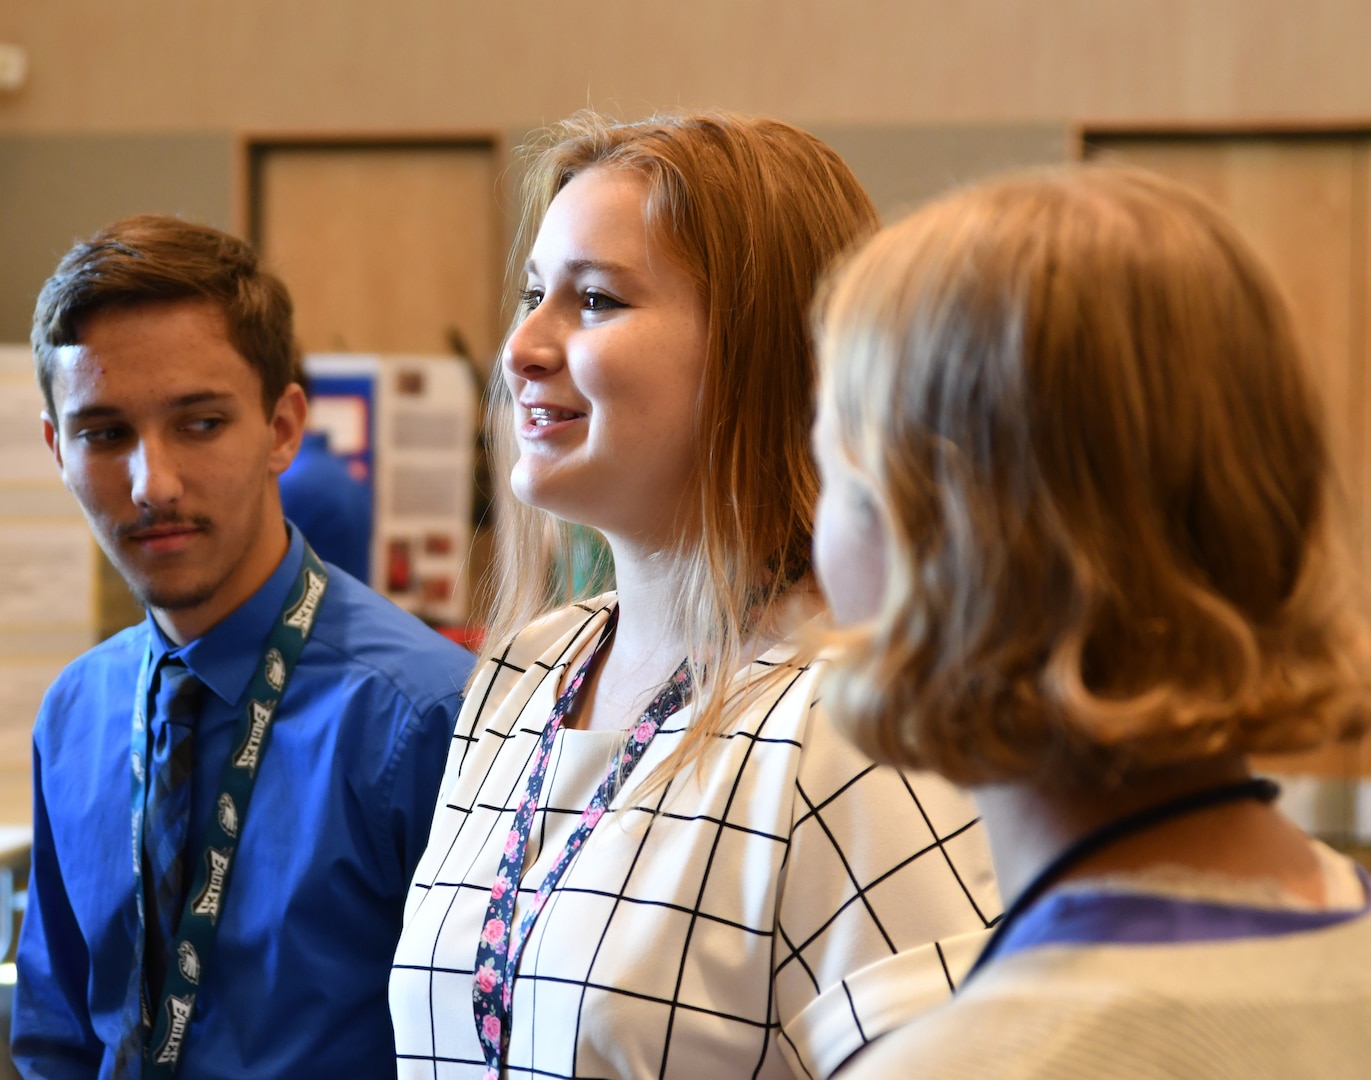 IMAGE: DAHLGREN, Va. (July 25, 2019) — A student briefs attendees on her technical project as her summer internship concluded at the Naval Surface Warfare Center Dahlgren Division. She was among students who completed their summer internships at Naval Surface Warfare Center Dahlgren Division. The Science and Engineering Apprenticeship Program (SEAP) encourages participating high school students to pursue science and engineering careers, to further their education via mentoring by laboratory personnel and their participation in research, and to make them aware of DoN research and technology efforts, which can lead to employment within the DoN.